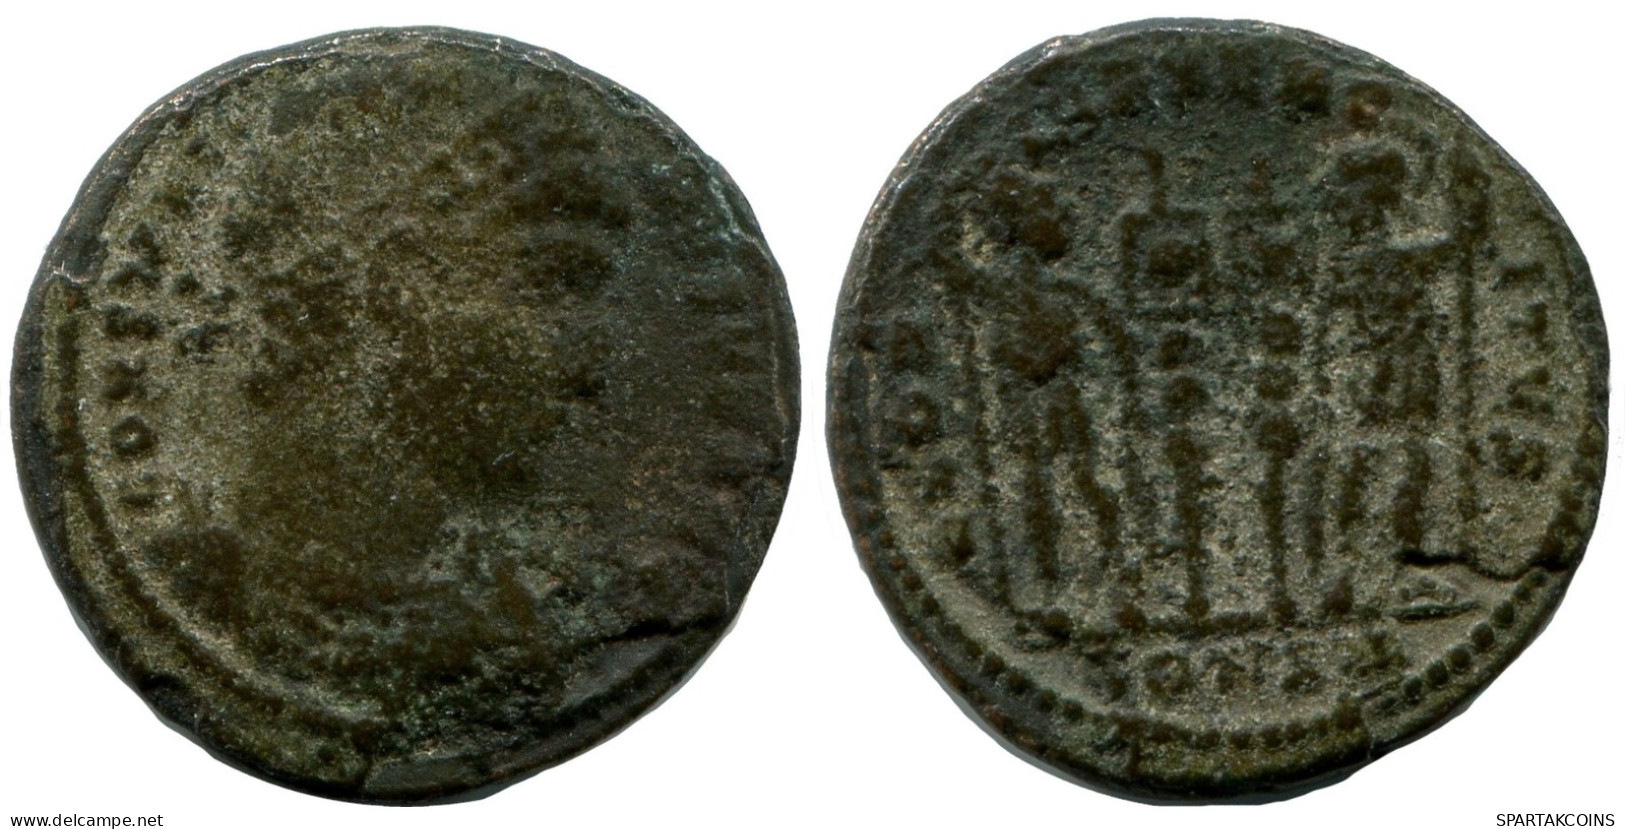 CONSTANTINE I CONSTANTINOPLE FROM THE ROYAL ONTARIO MUSEUM #ANC10776.14.D.A - El Impero Christiano (307 / 363)